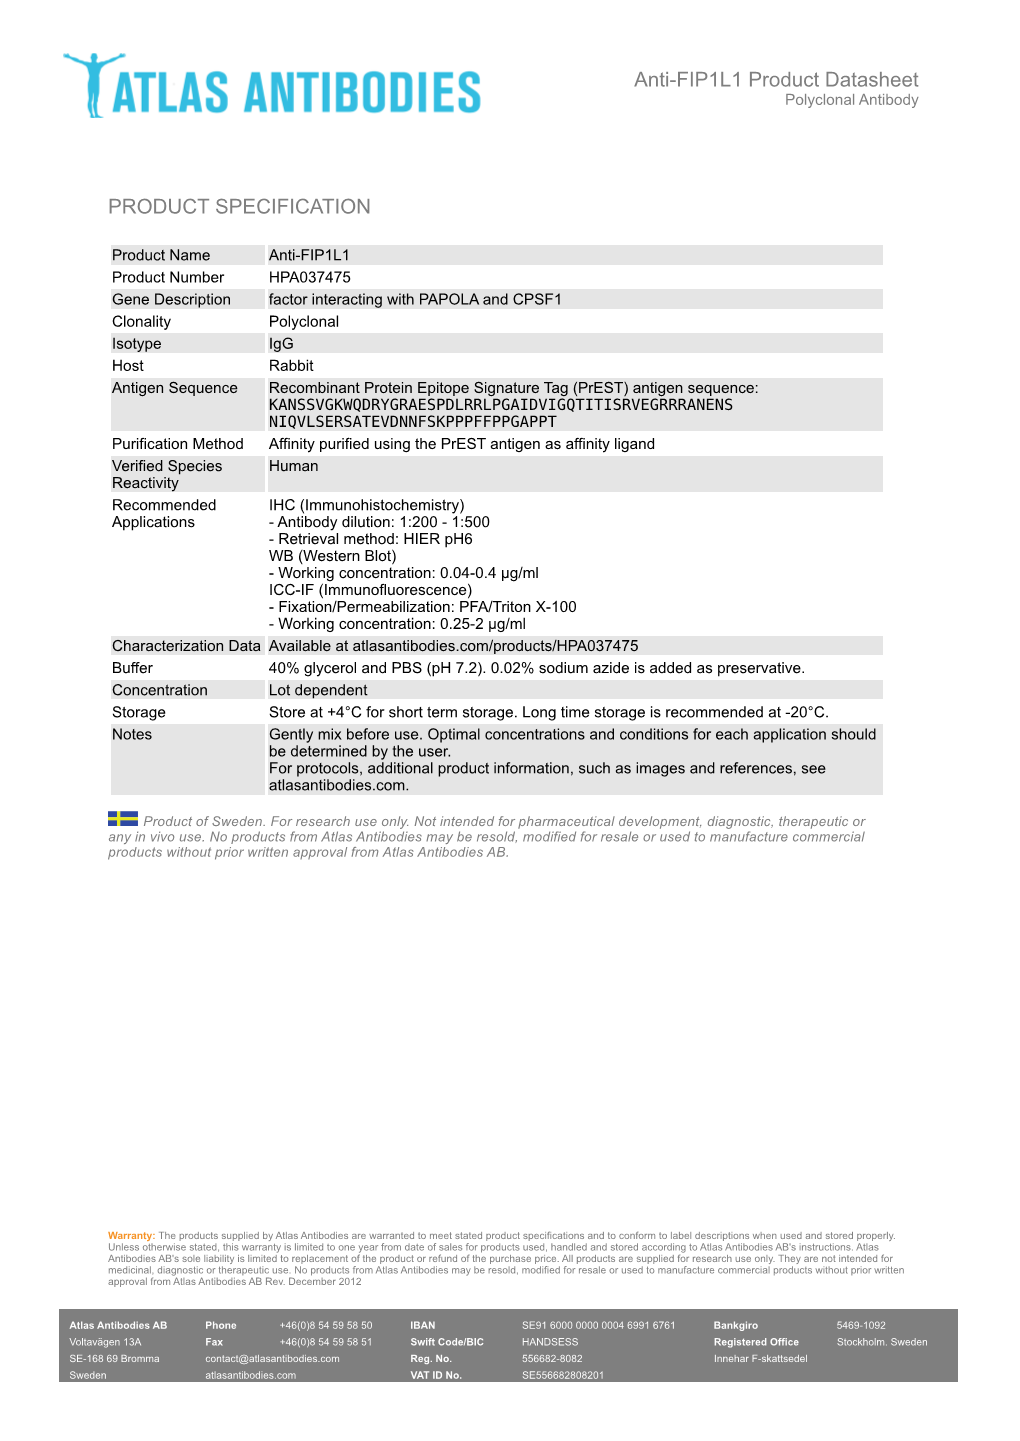 PRODUCT SPECIFICATION Anti-FIP1L1 Product Datasheet